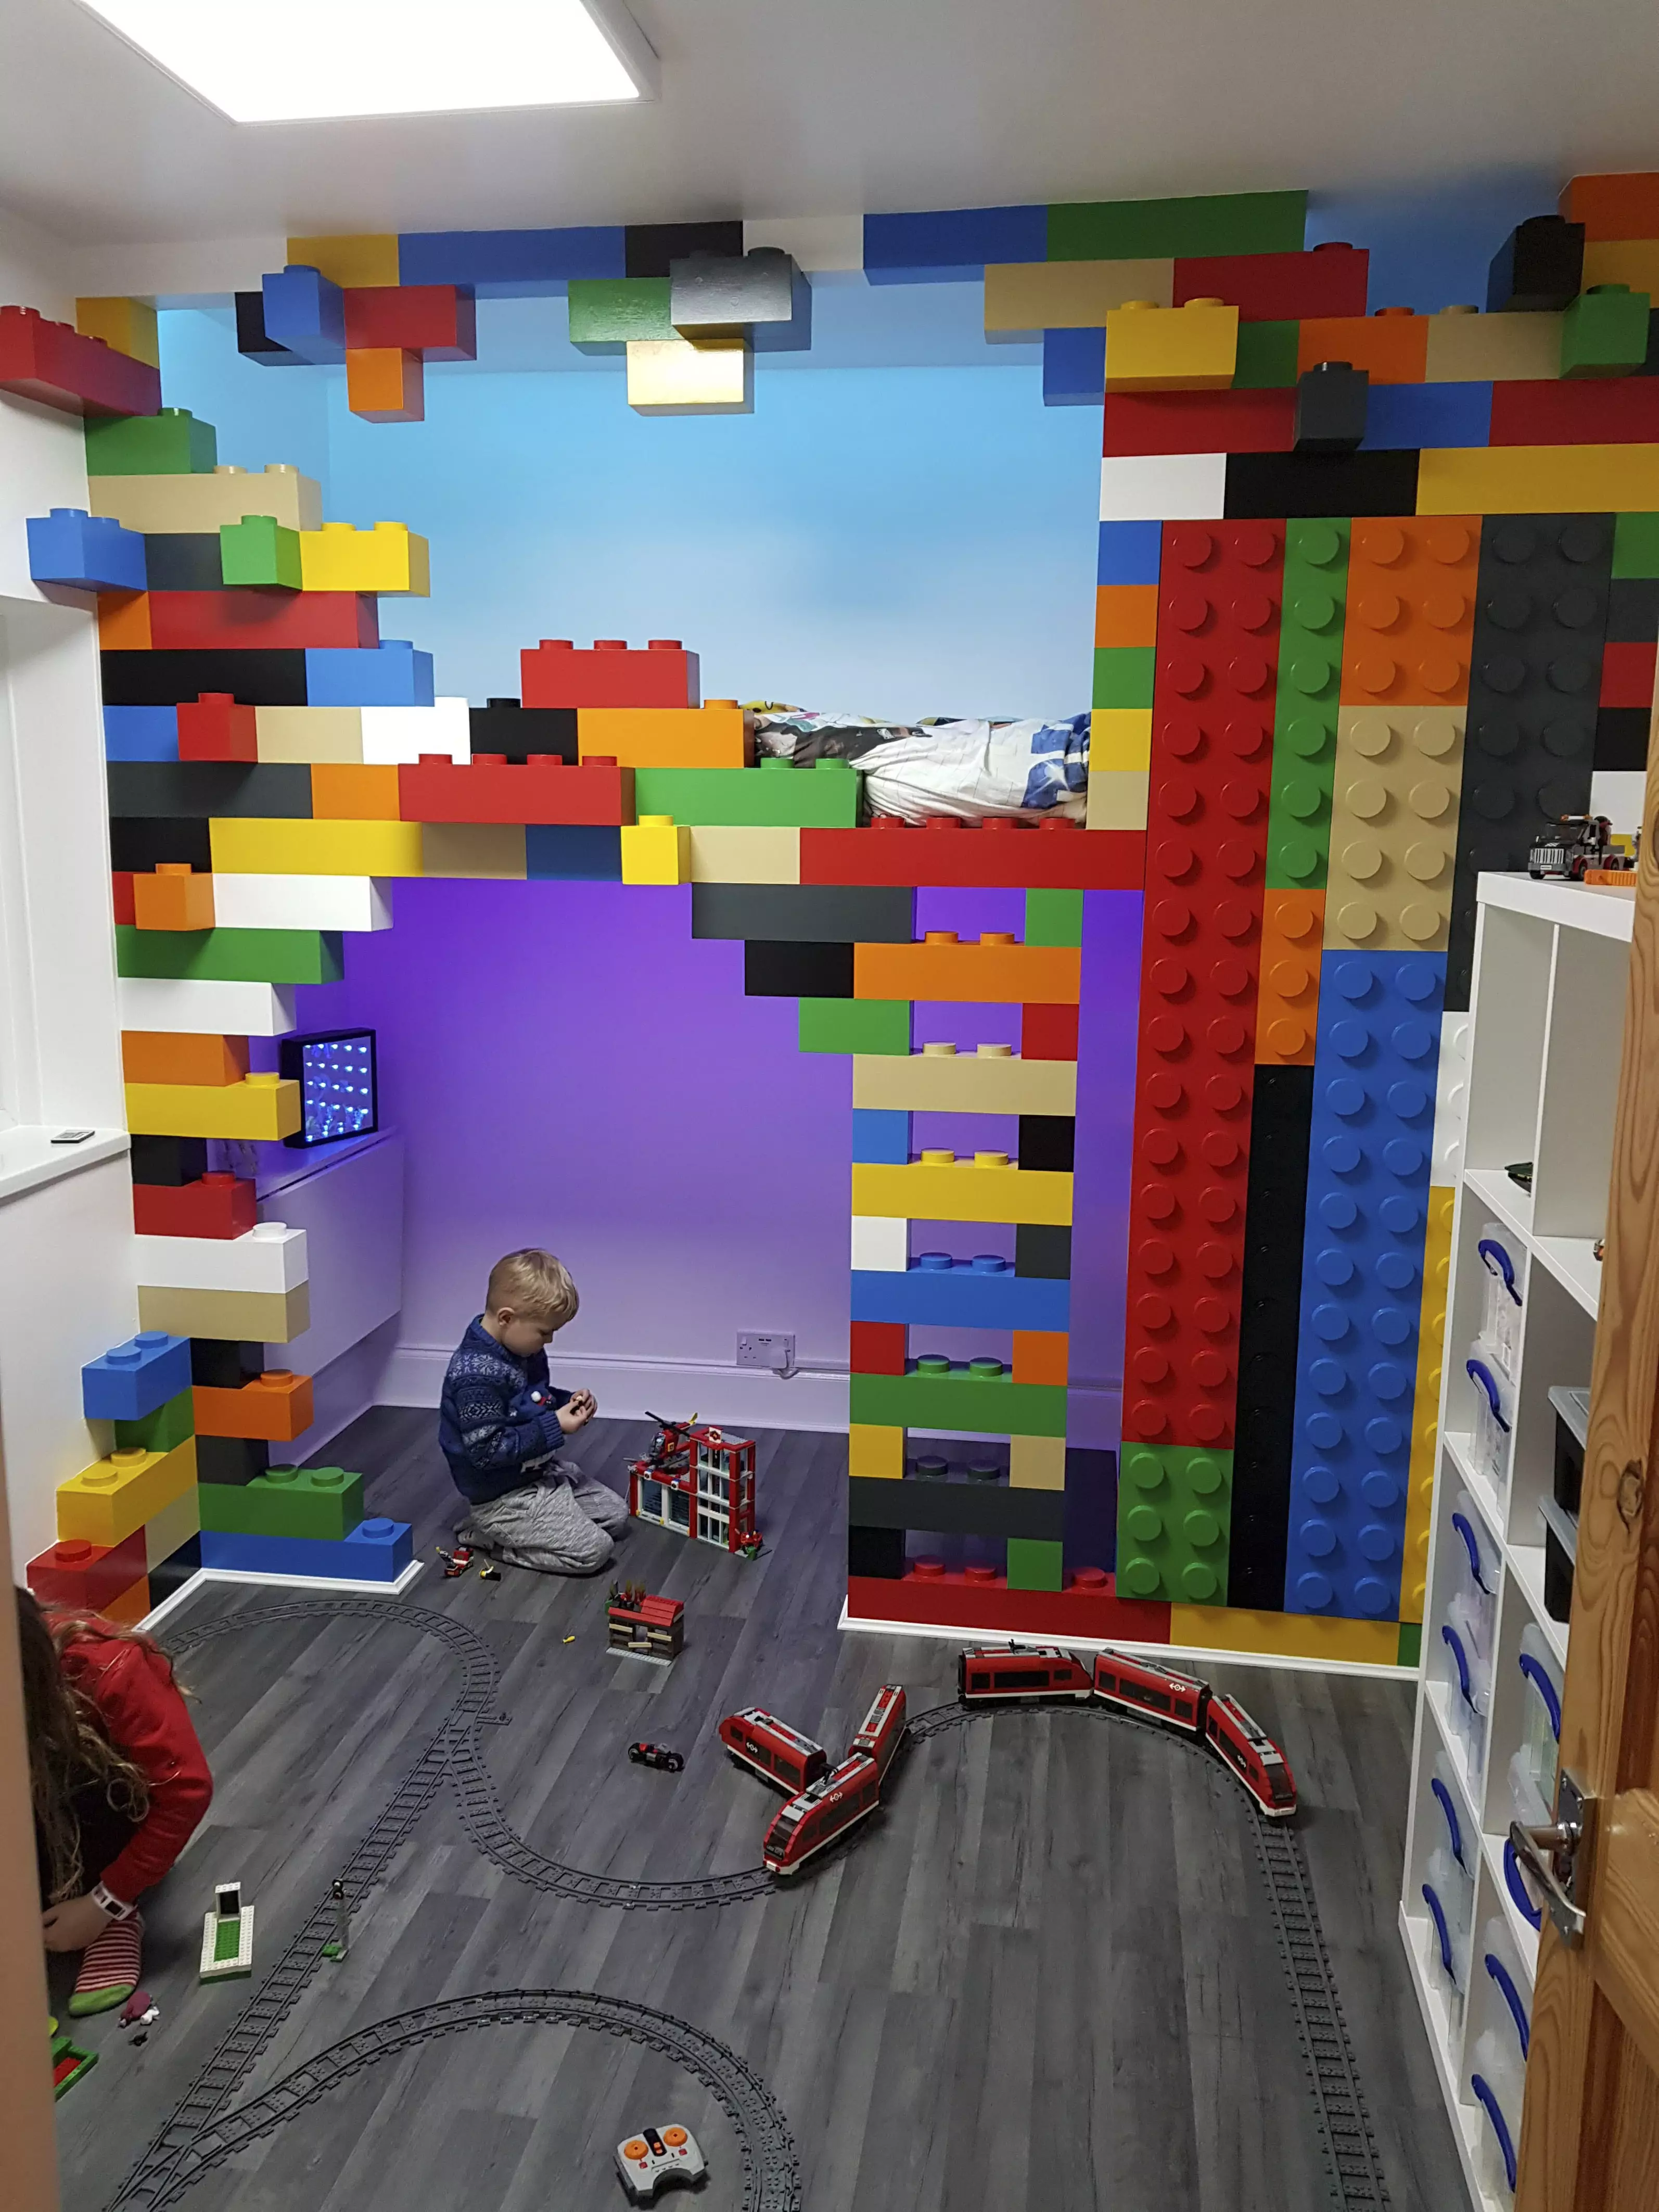 Four-year-old Michael actually seemed more taken with the expanded LEGO set his dad had collected than the bedroom design (